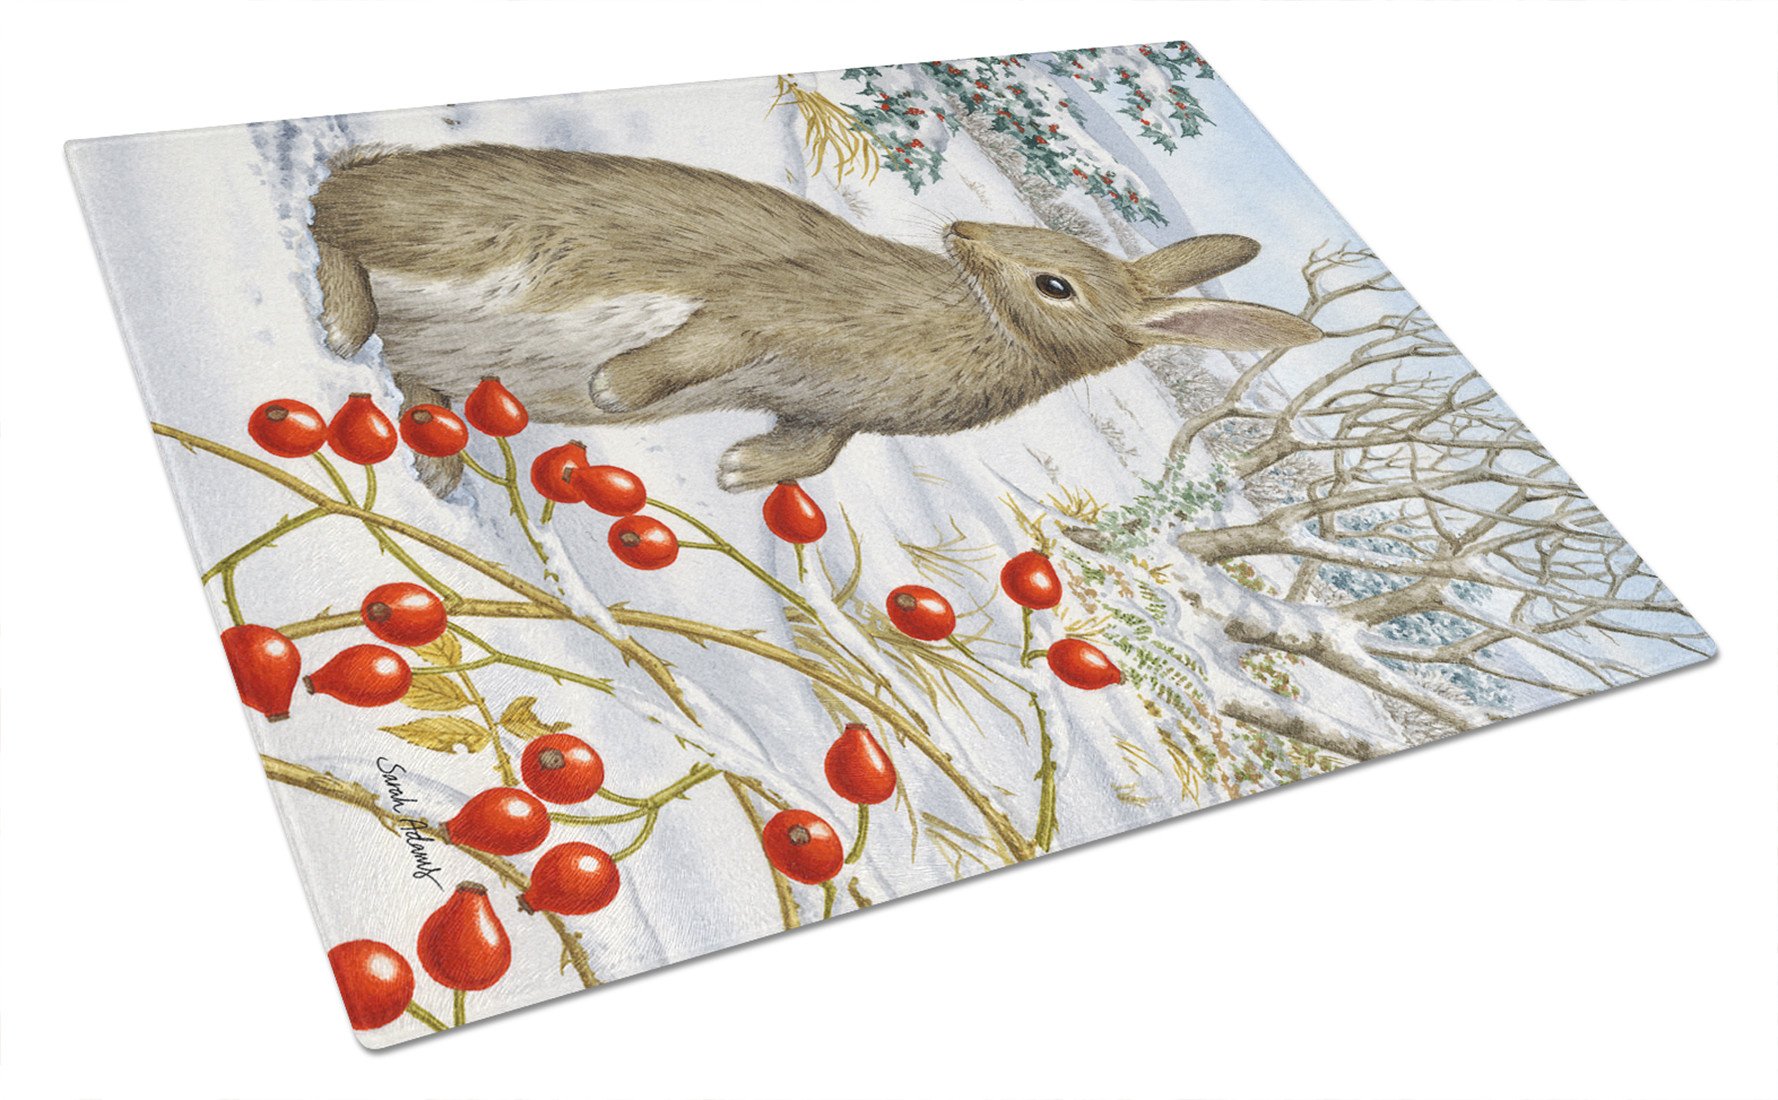 Rabbit with Berries Glass Cutting Board Large ASA2035LCB by Caroline's Treasures